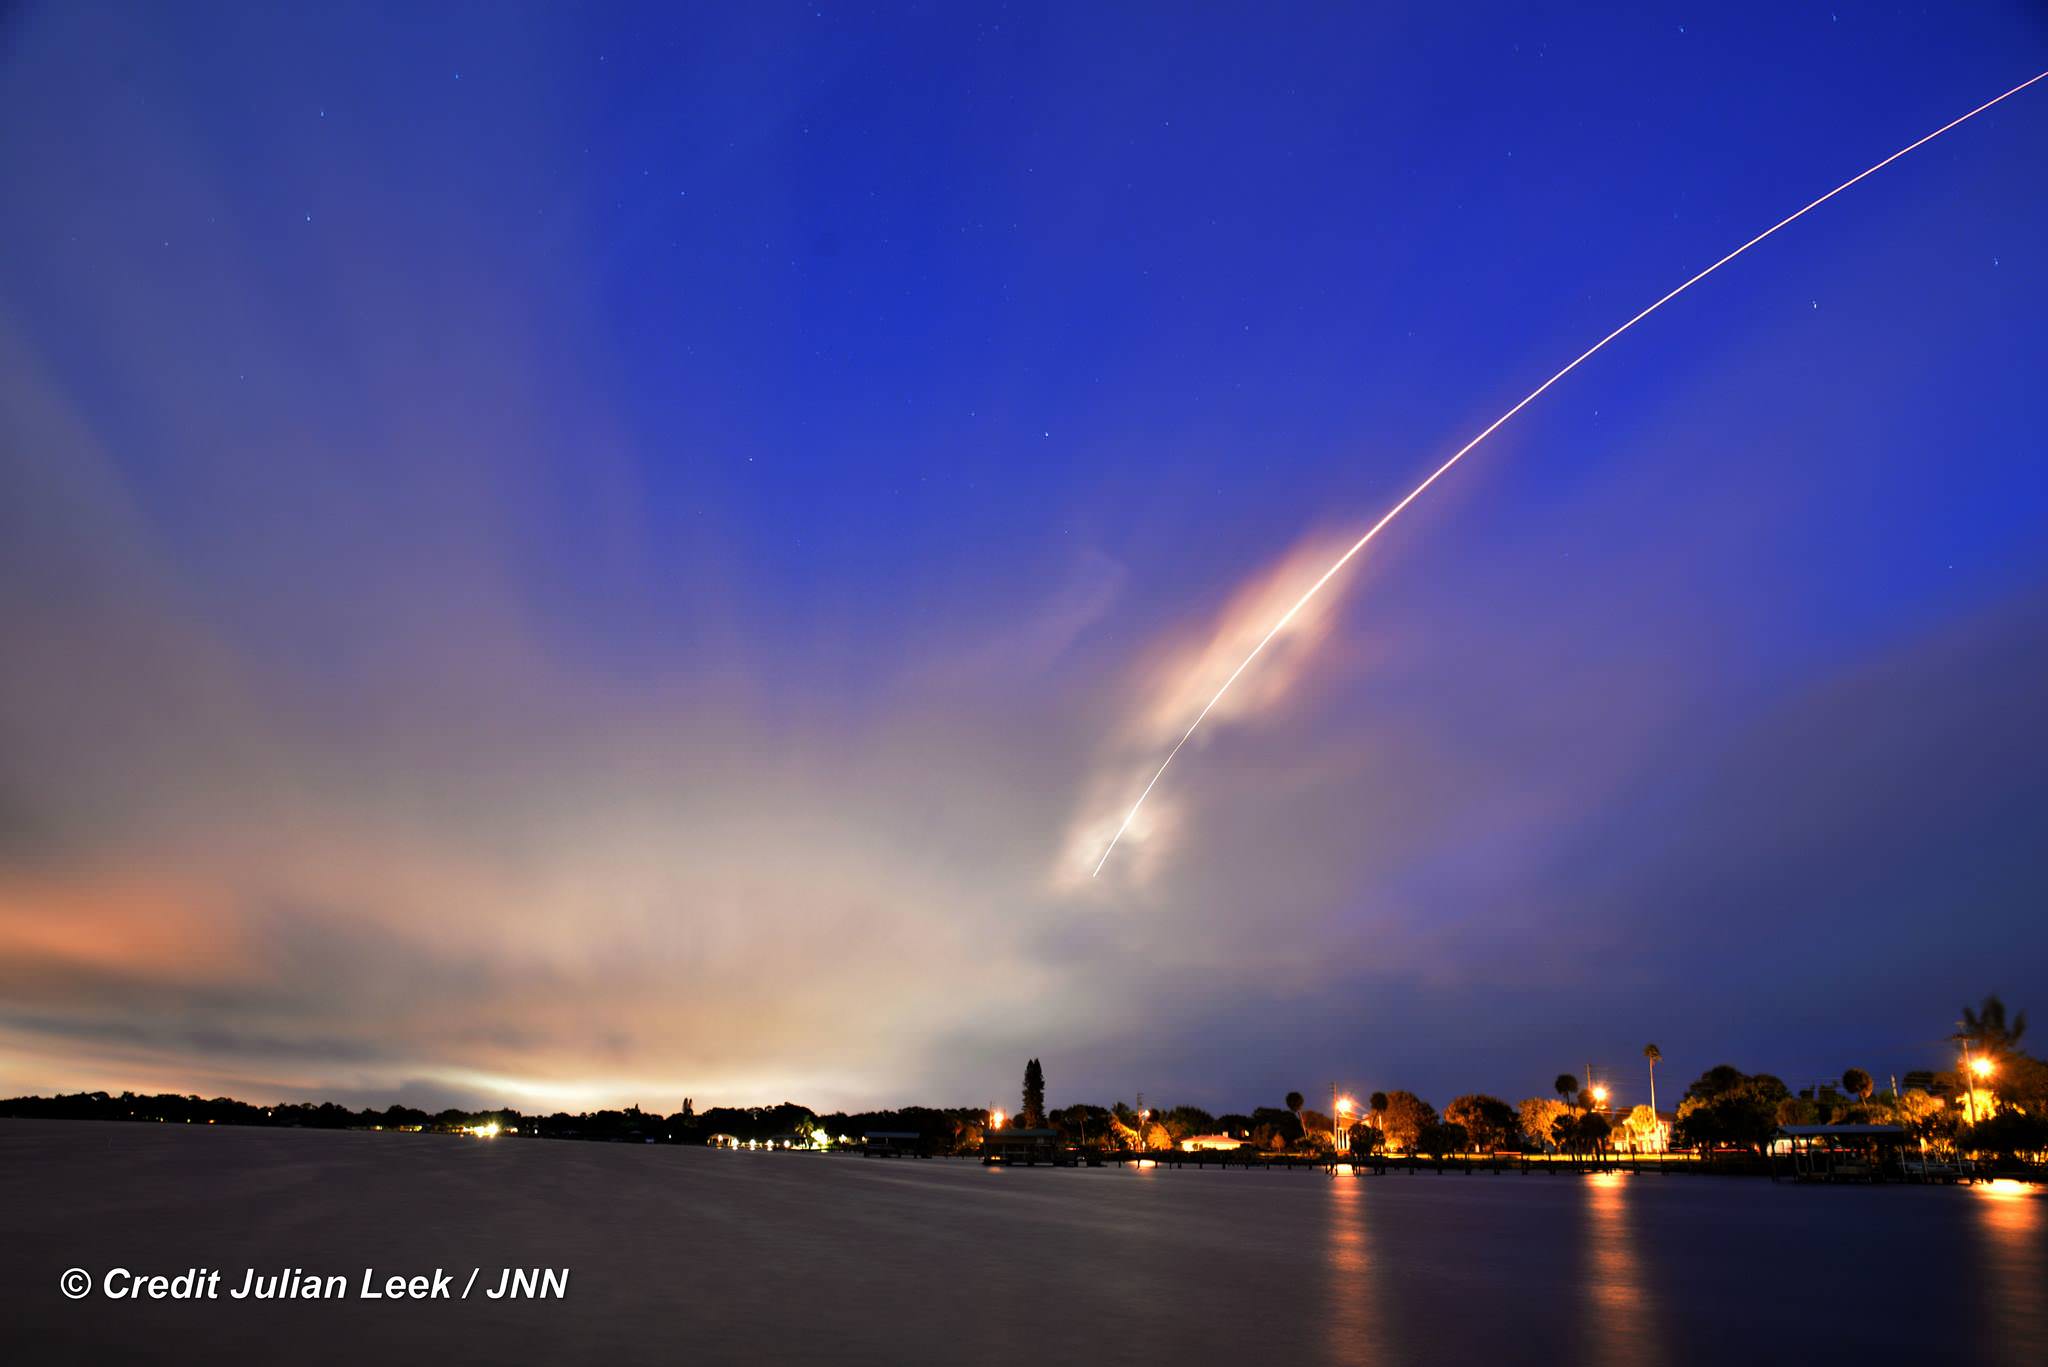 100th United Launch Alliance (ULA) rocket streaks to orbit with Atlas V booster carrying the Morelos-3 mission for Mexico from Space Launch Complex 41 on Cape Canaveral Air Force Station, Florida at 6:28 a.m. EDT, Oct. 2, 2015 as seen from Melbourne Beach pier, Florida.  Credit: Julian Leek